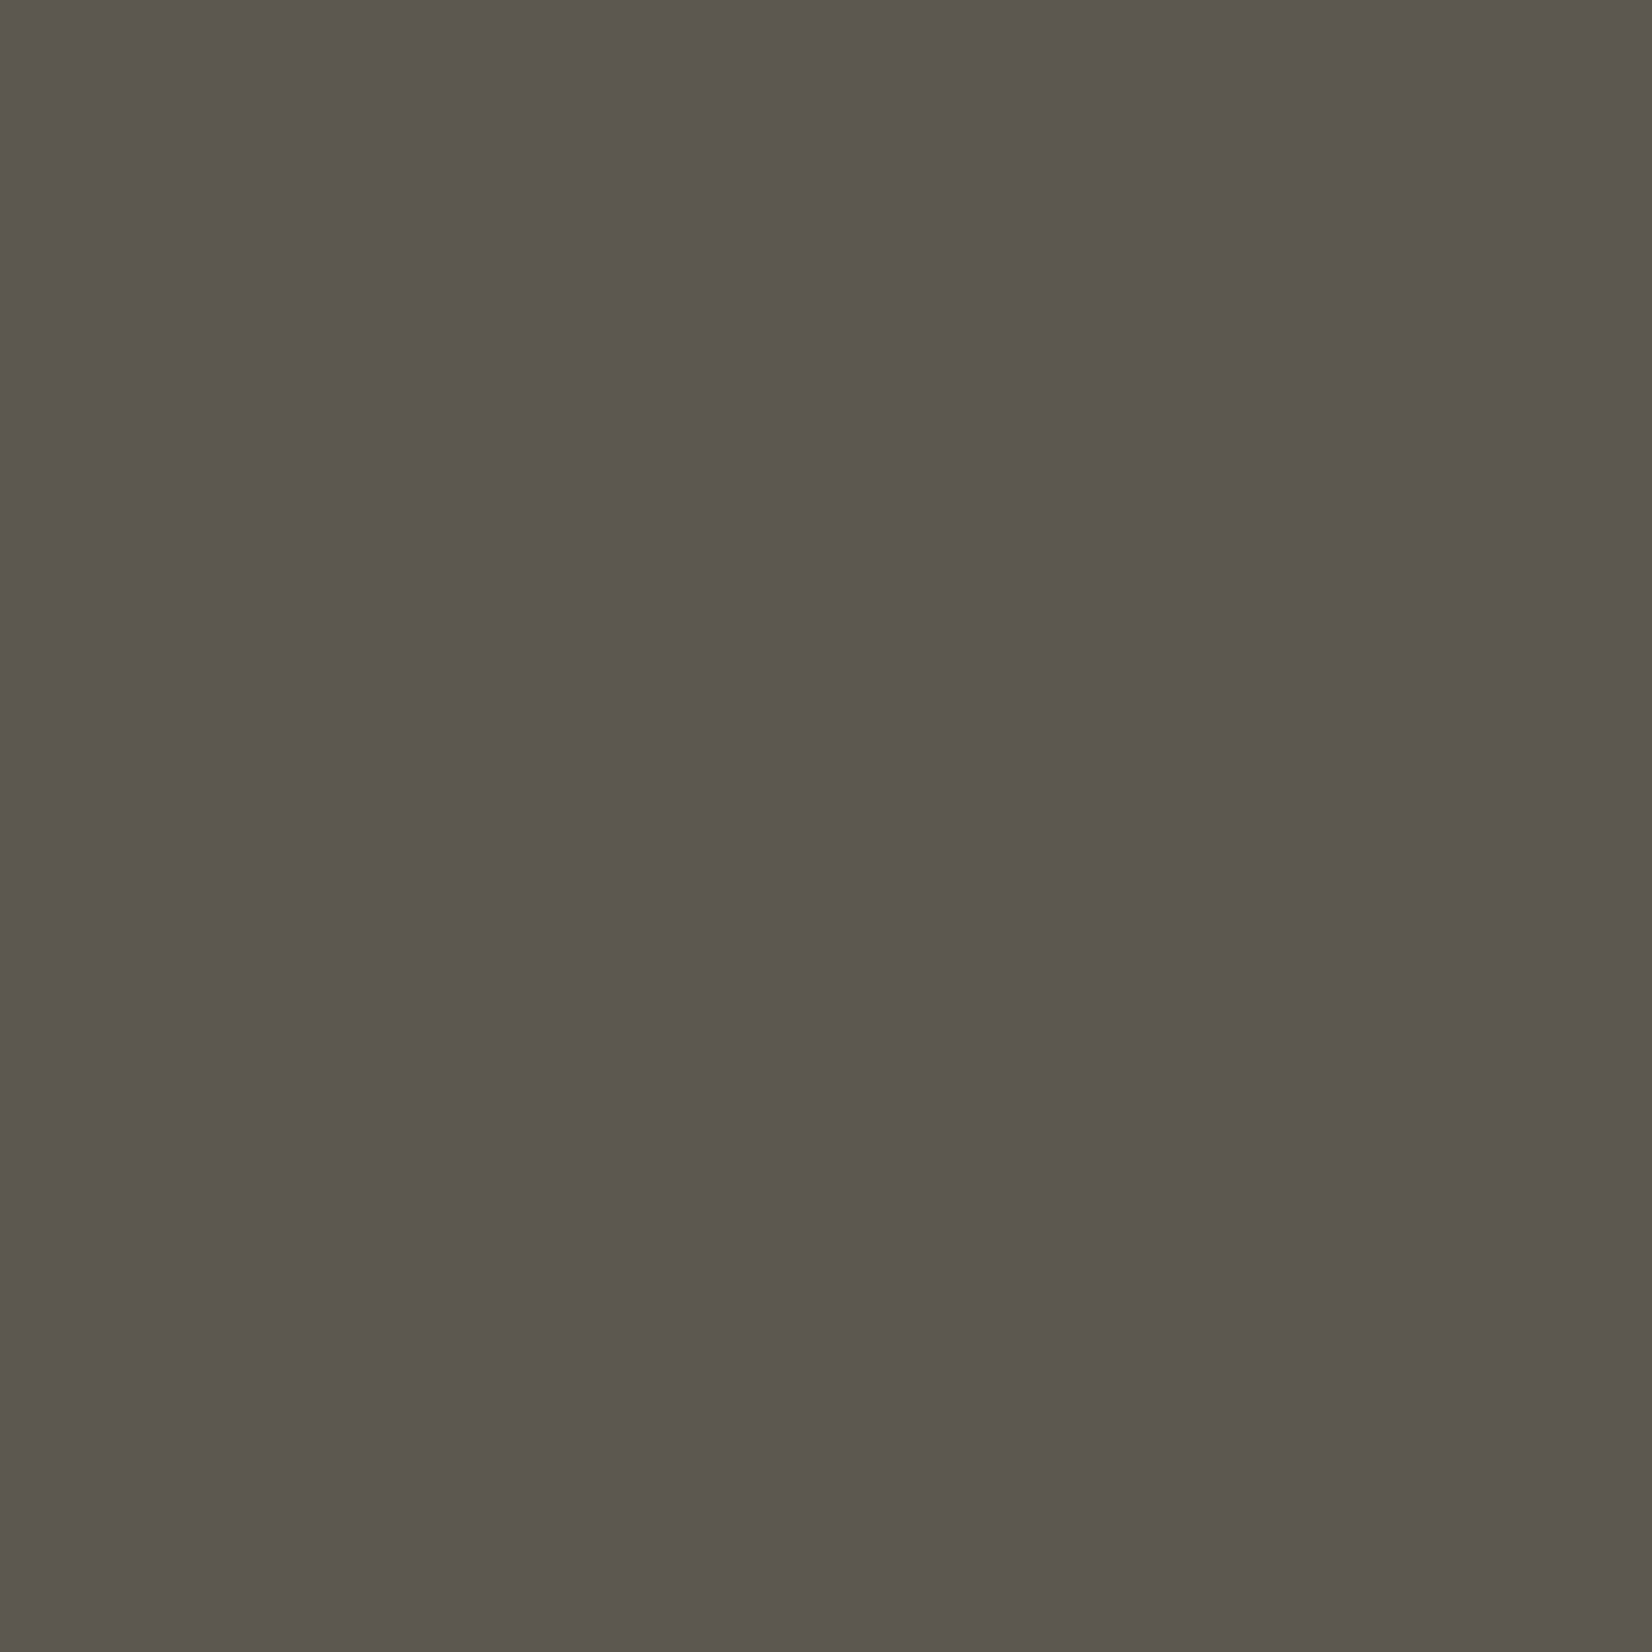 PRISMACOLOR CHISEL MARKER PM163 FRENCH GRAY 90% (FINAL SALE) (TBD)